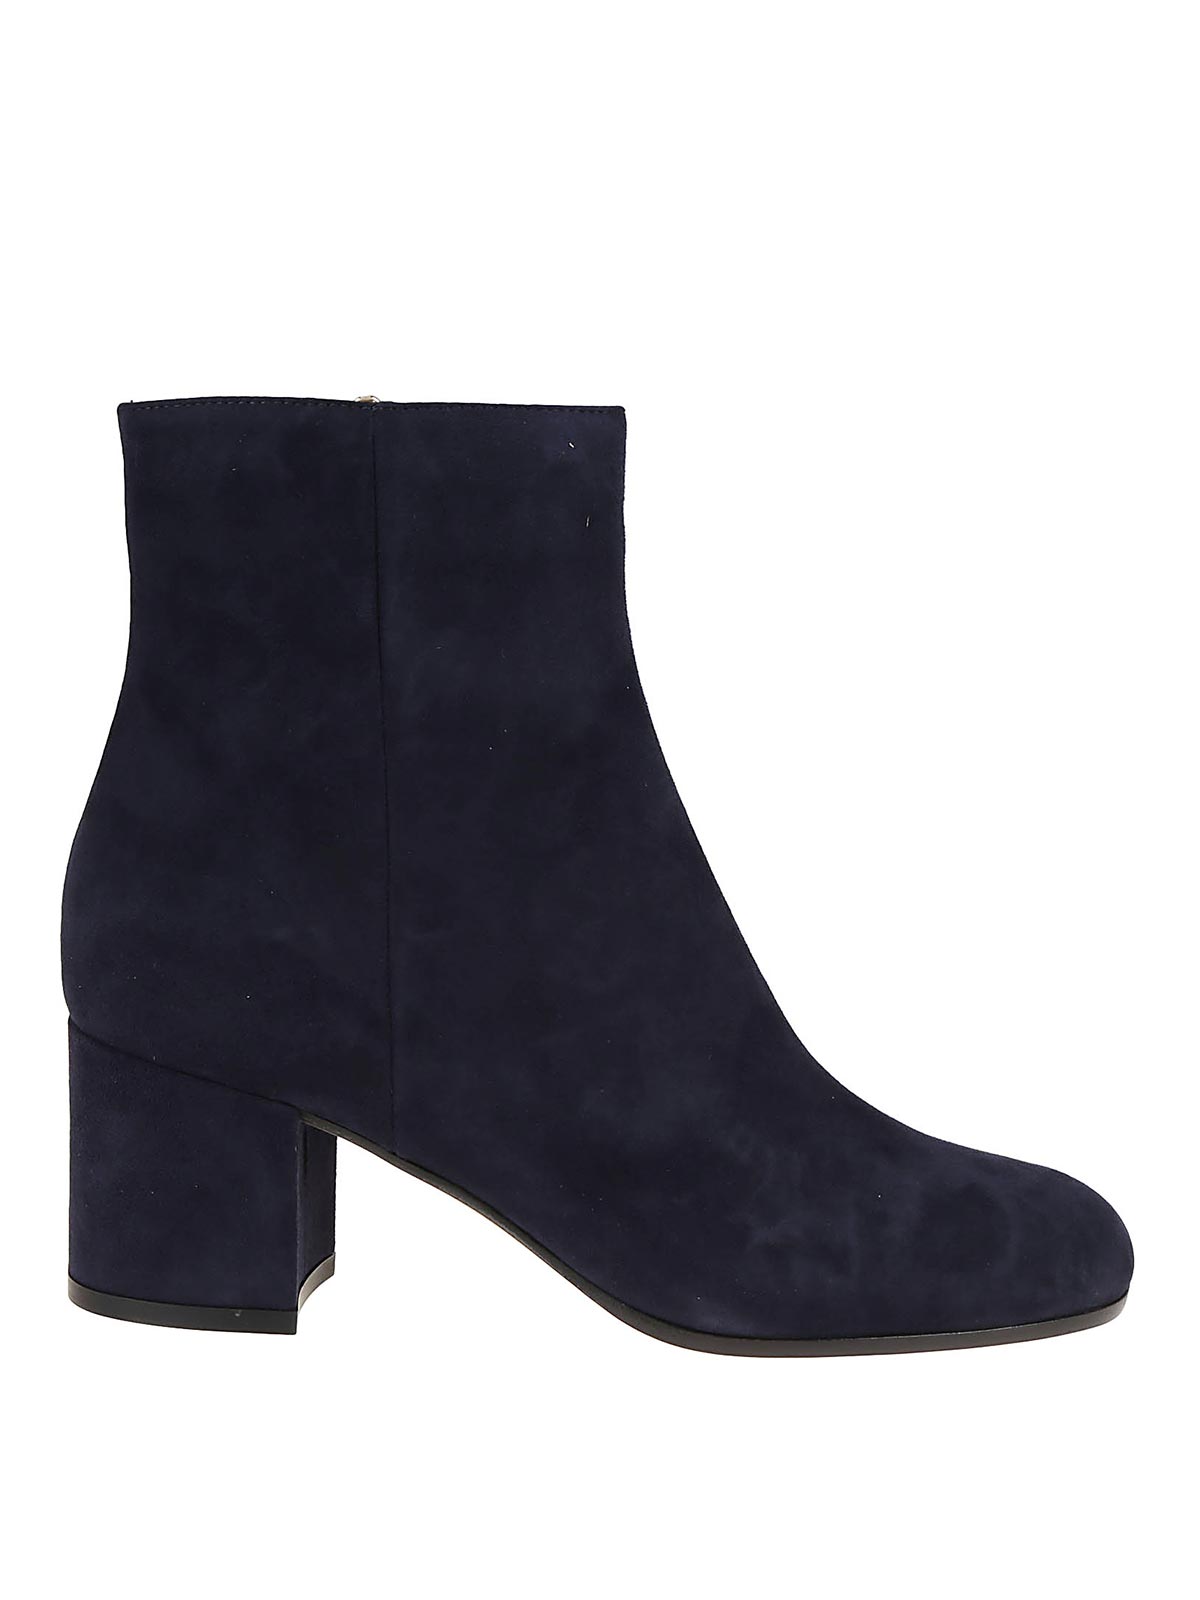 GIANVITO ROSSI MARGAUX MID BOOTIE SUEDE BOOT